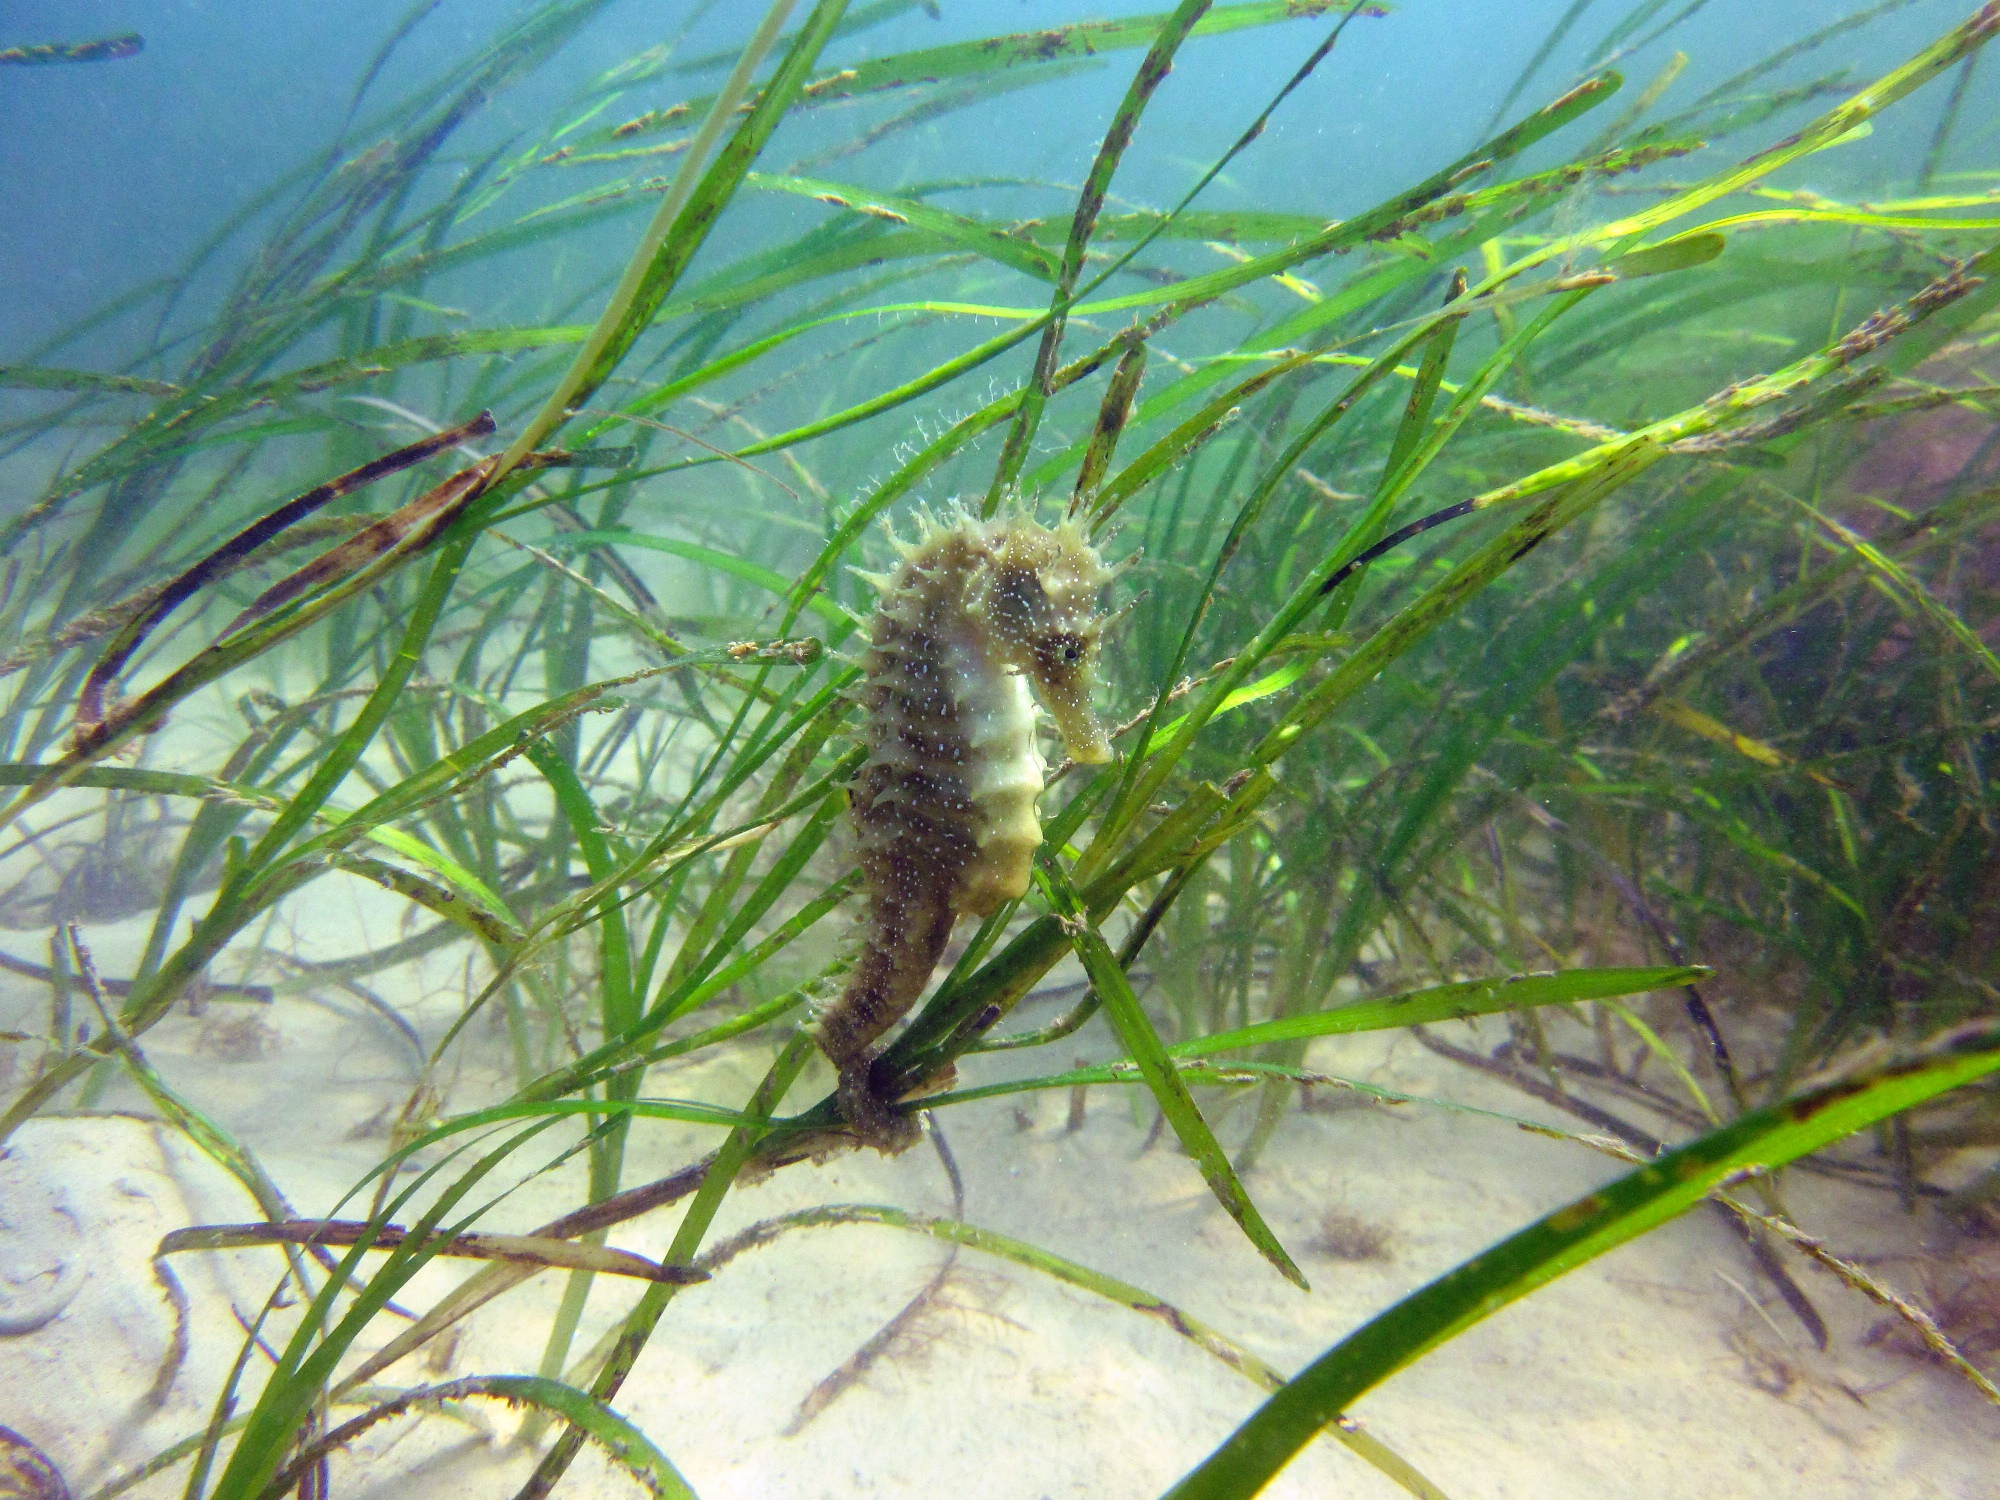 A seahorse in seagrass